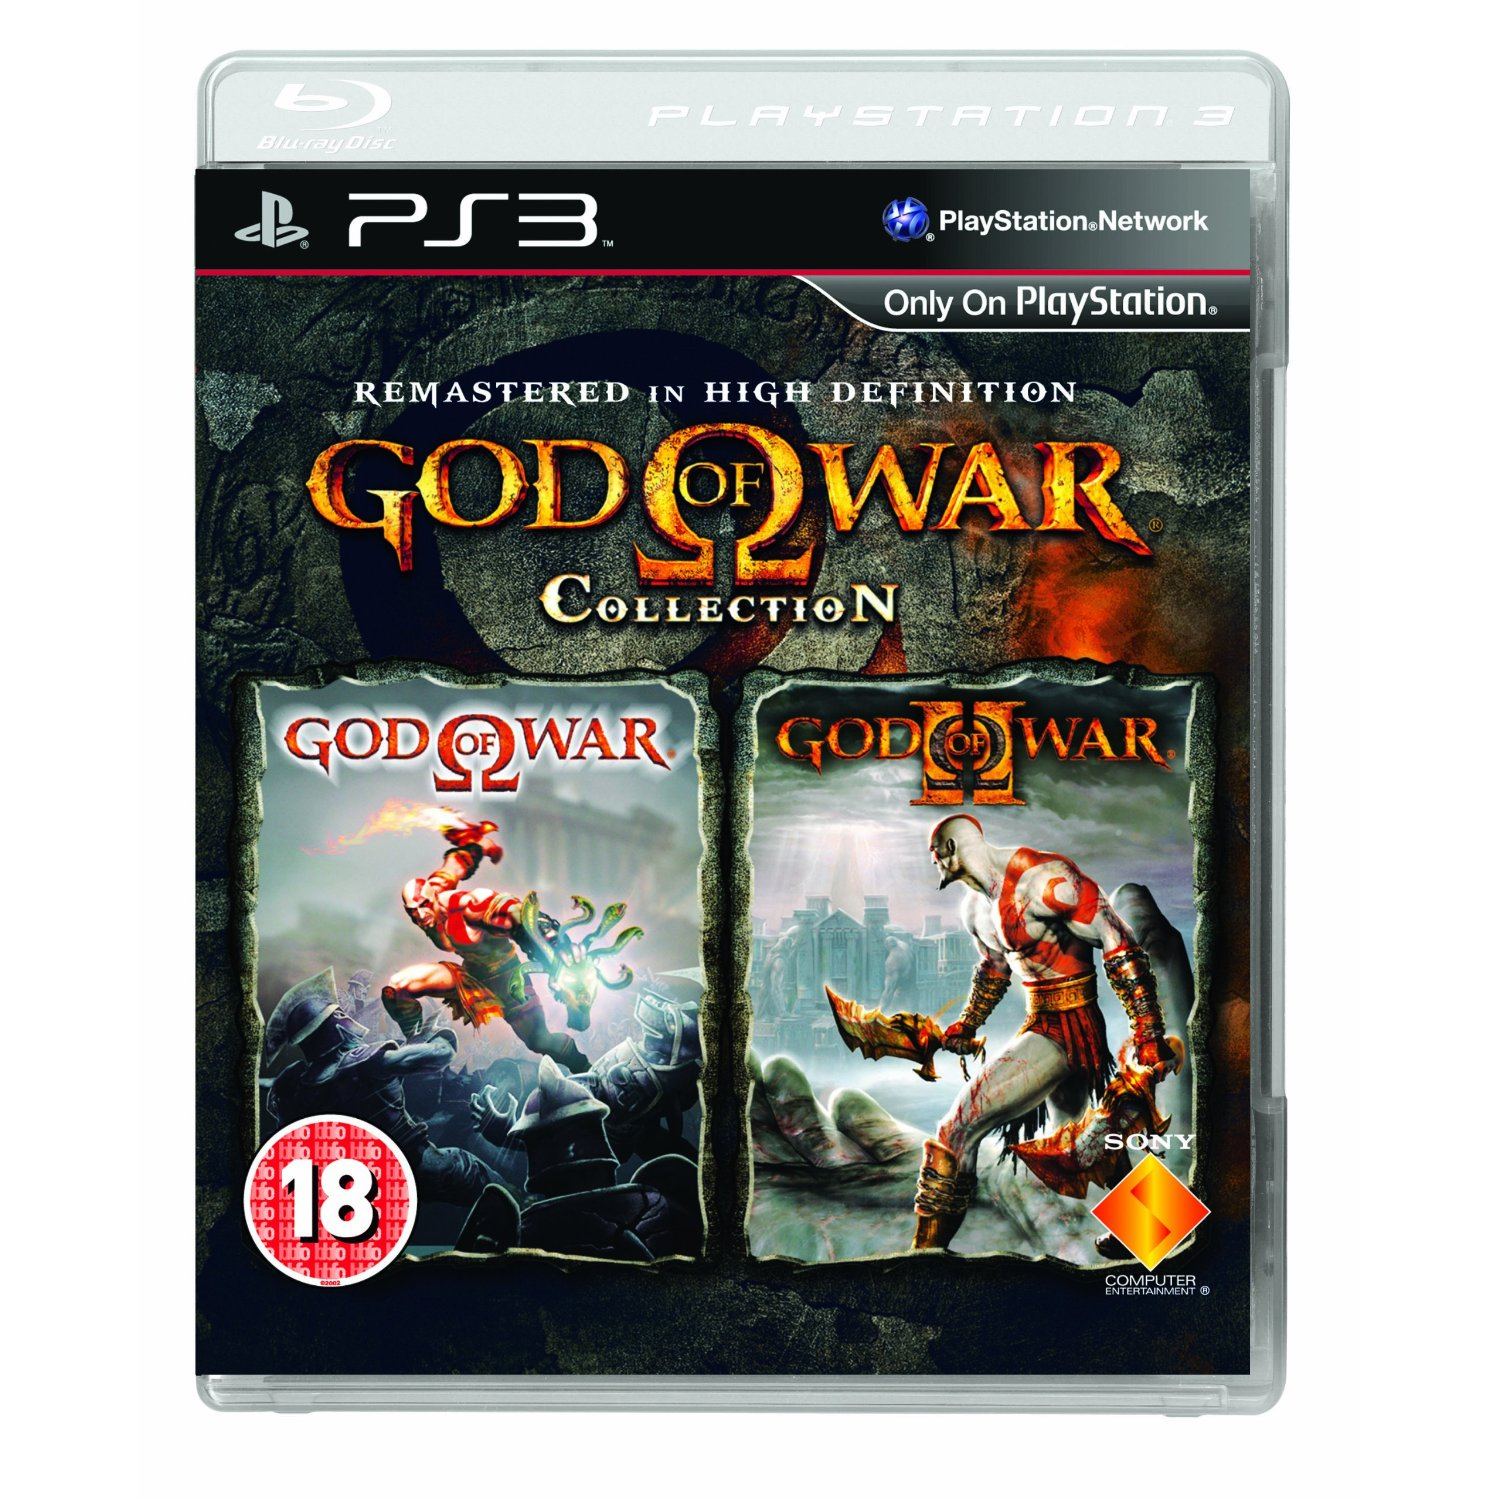 God of War Collection for PlayStation 3